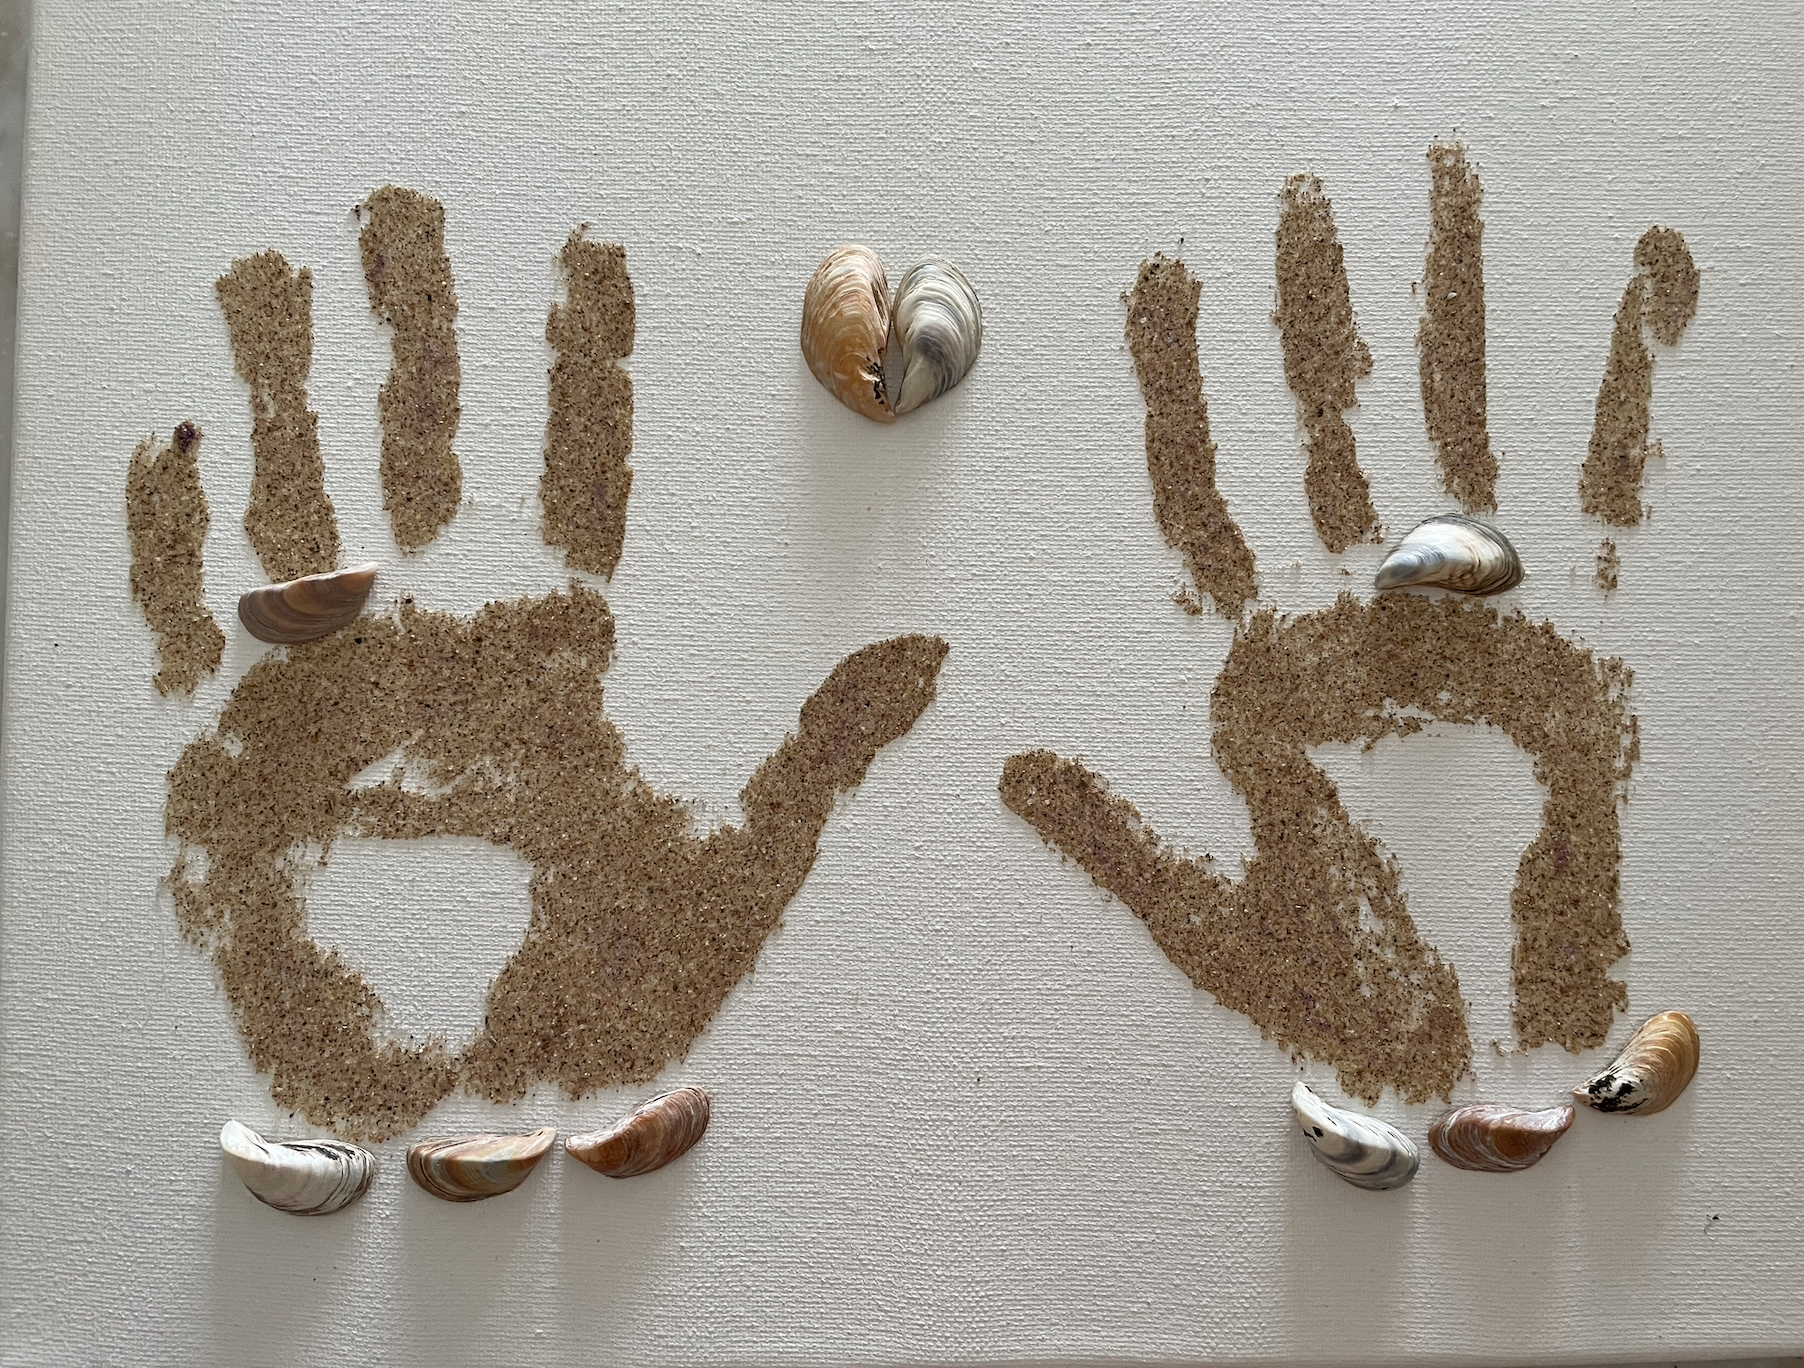 Handprint art made with sand and shells from the beach where we got engaged.